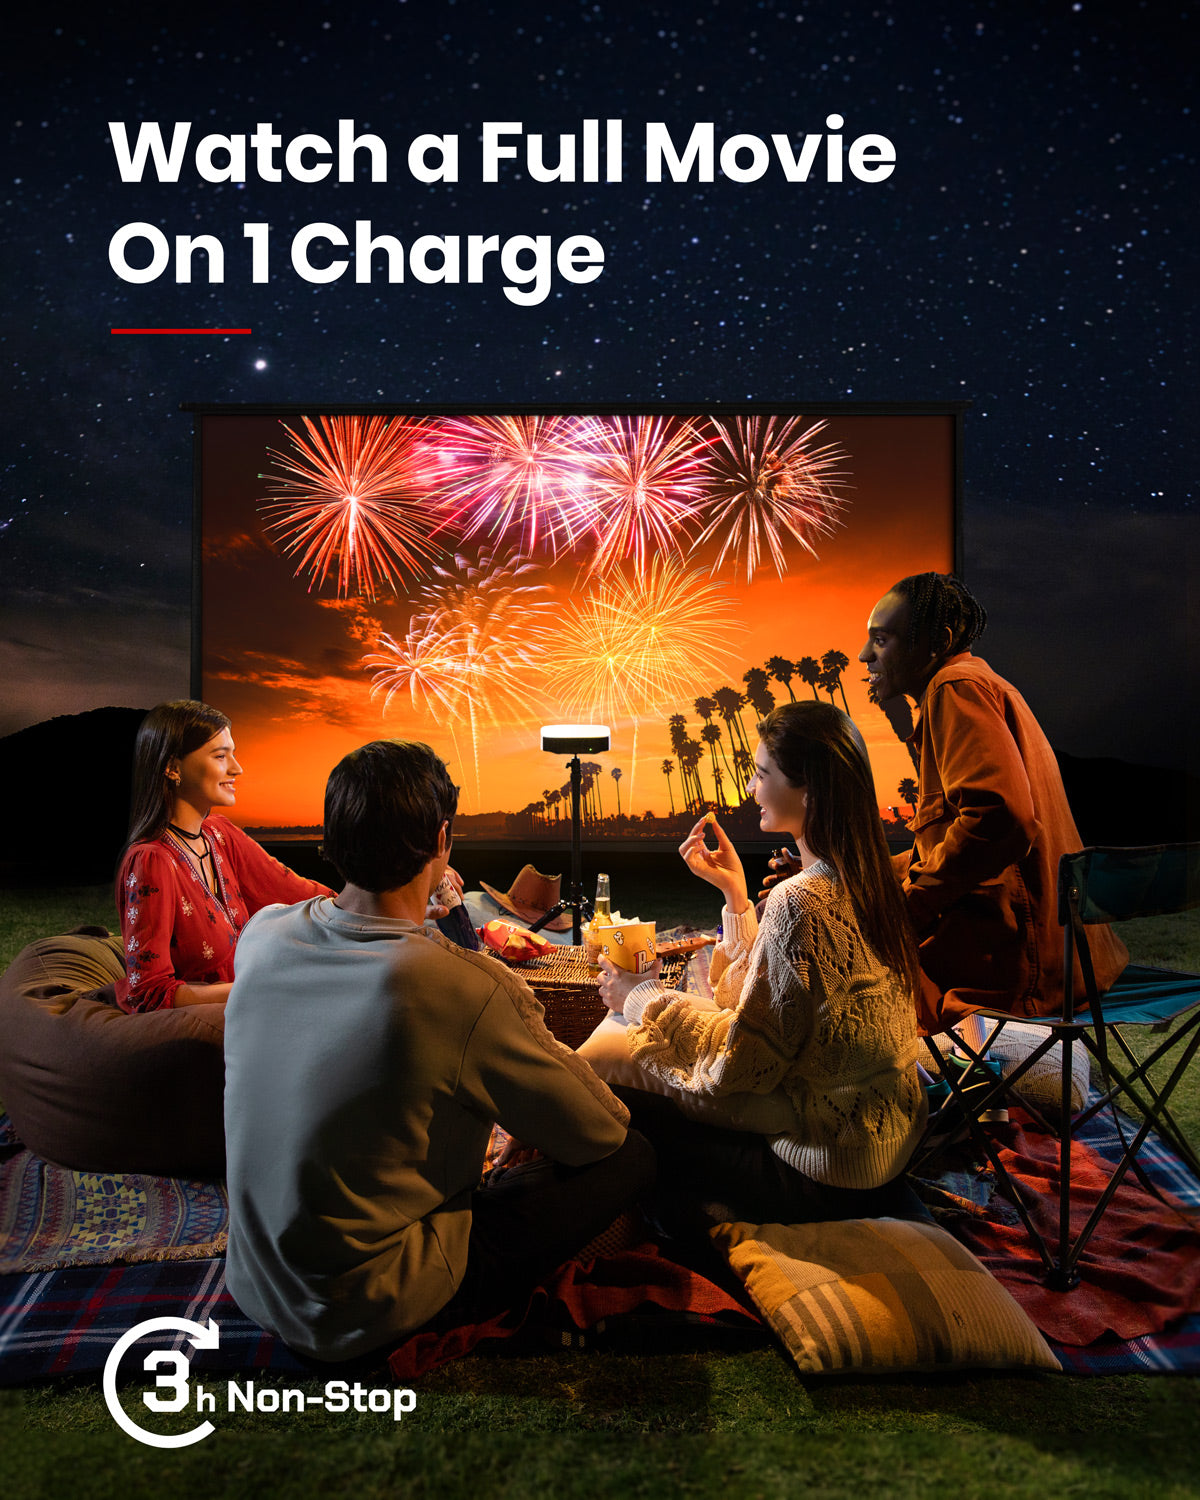 A group of friends use a Solar Portable projector to watch fireworks on a screen while they sit outside at night.